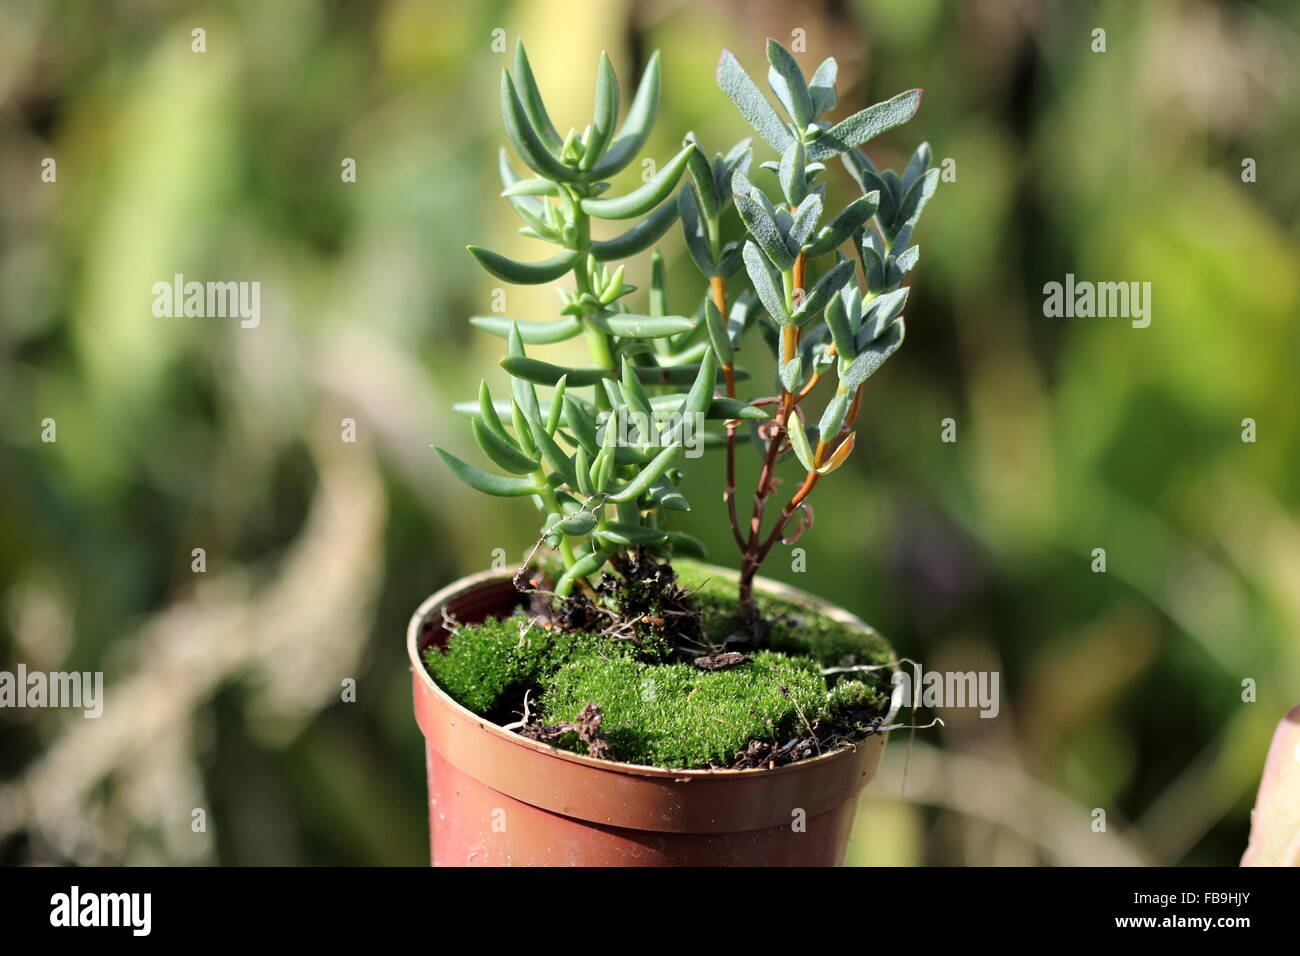 Growing Ice plant succulent or also known as  Lampranthus in a pot Stock Photo